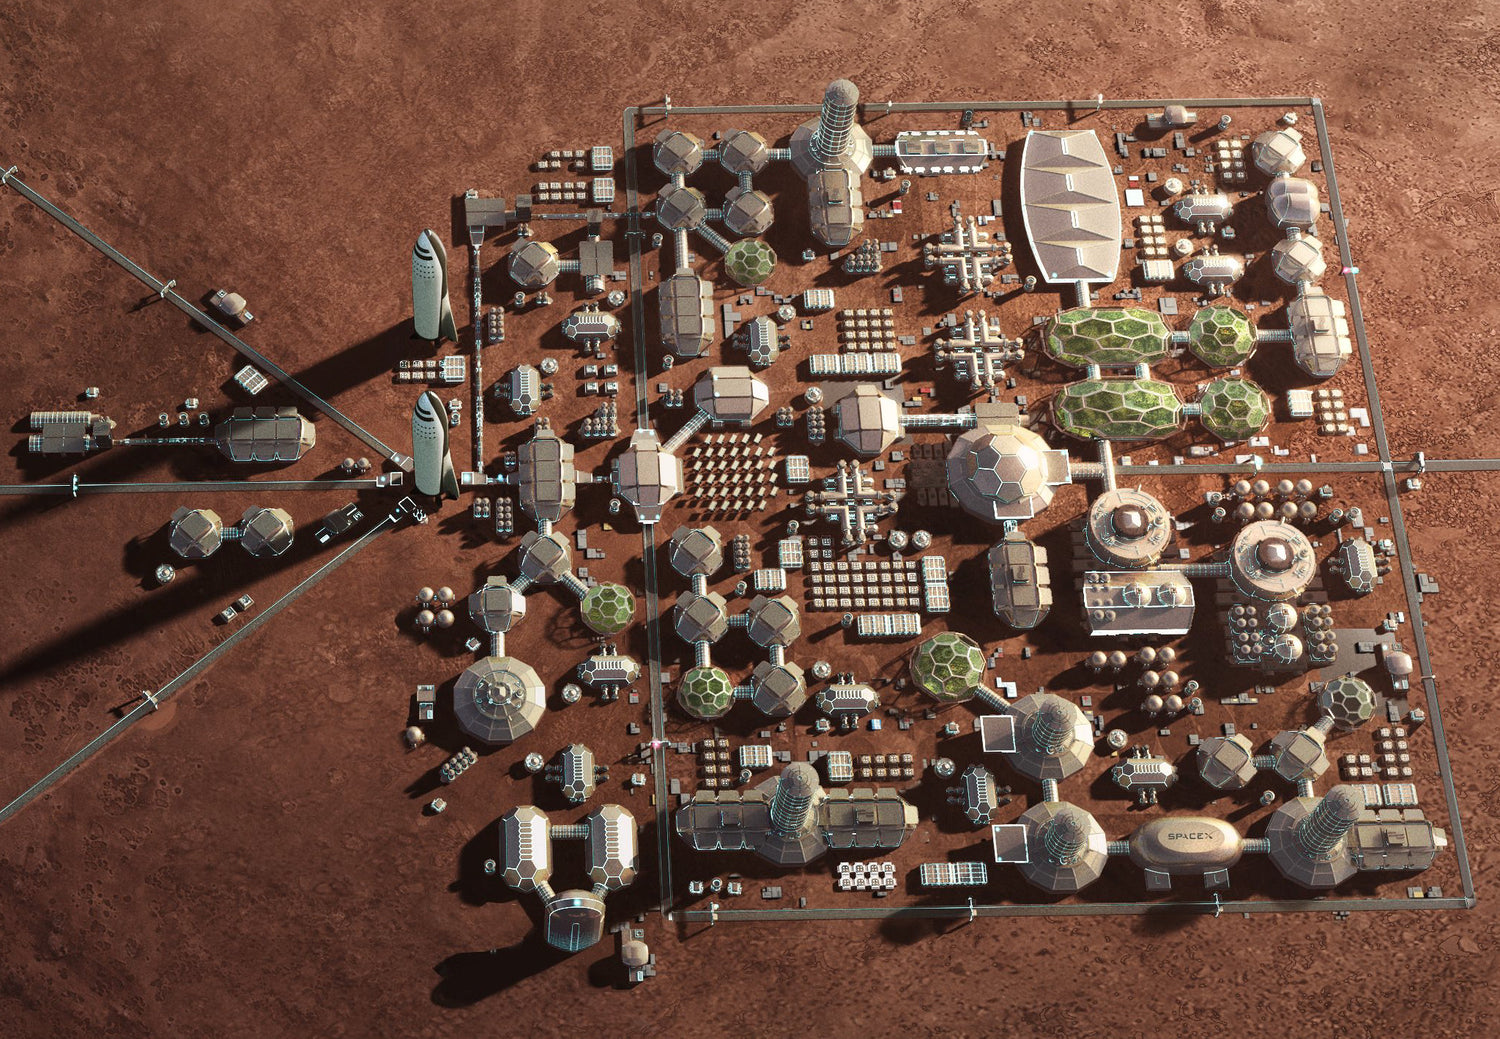 Elon Musk envisions creating a self-sustaining civilization on Mars within 20 years